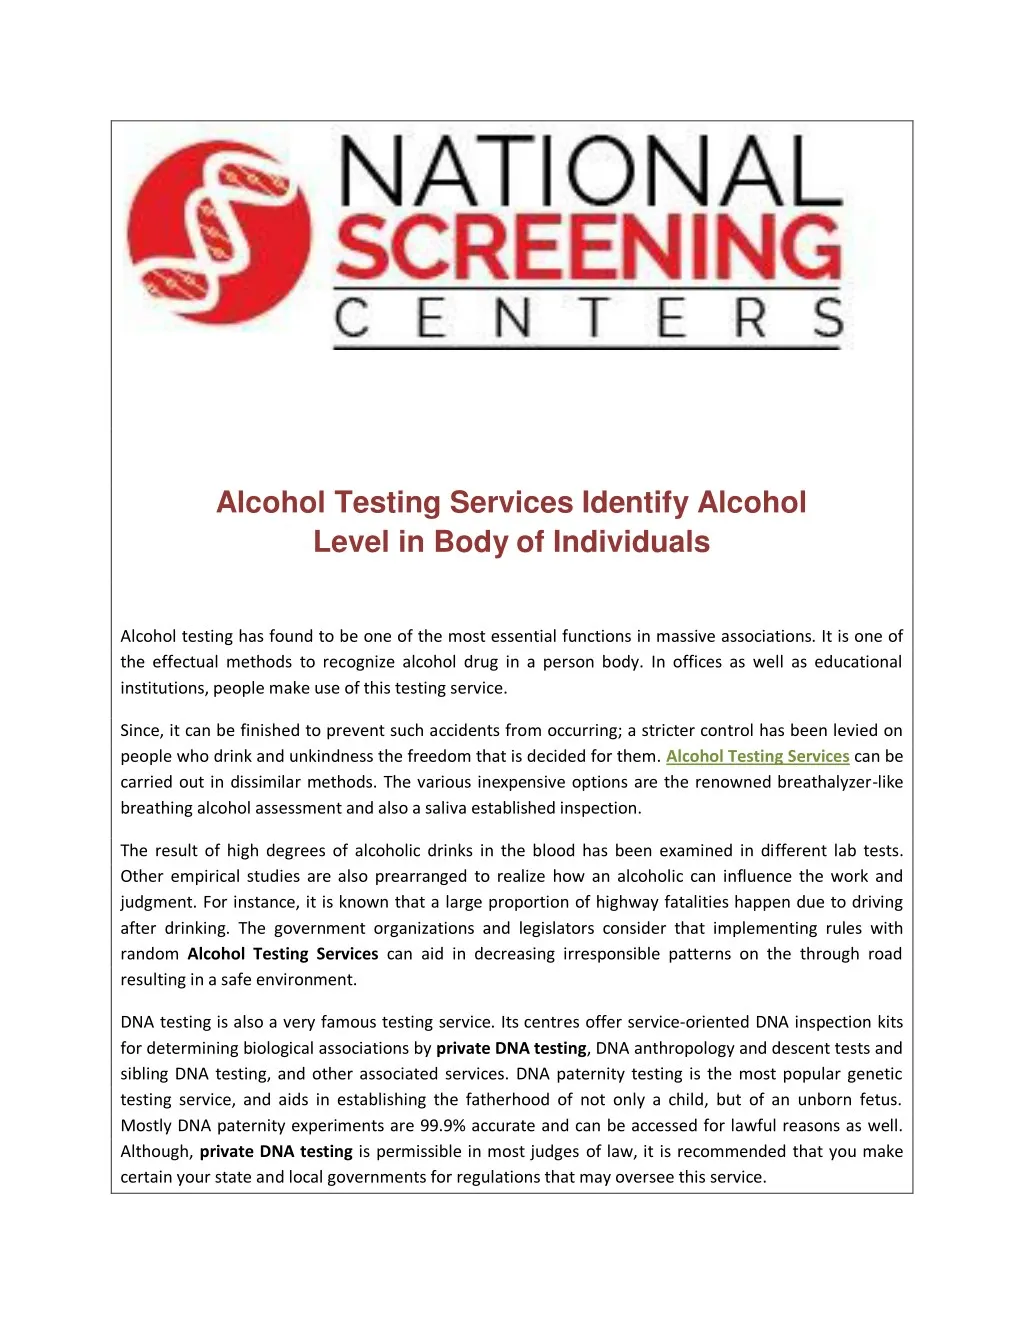 alcohol testing services identify alcohol level